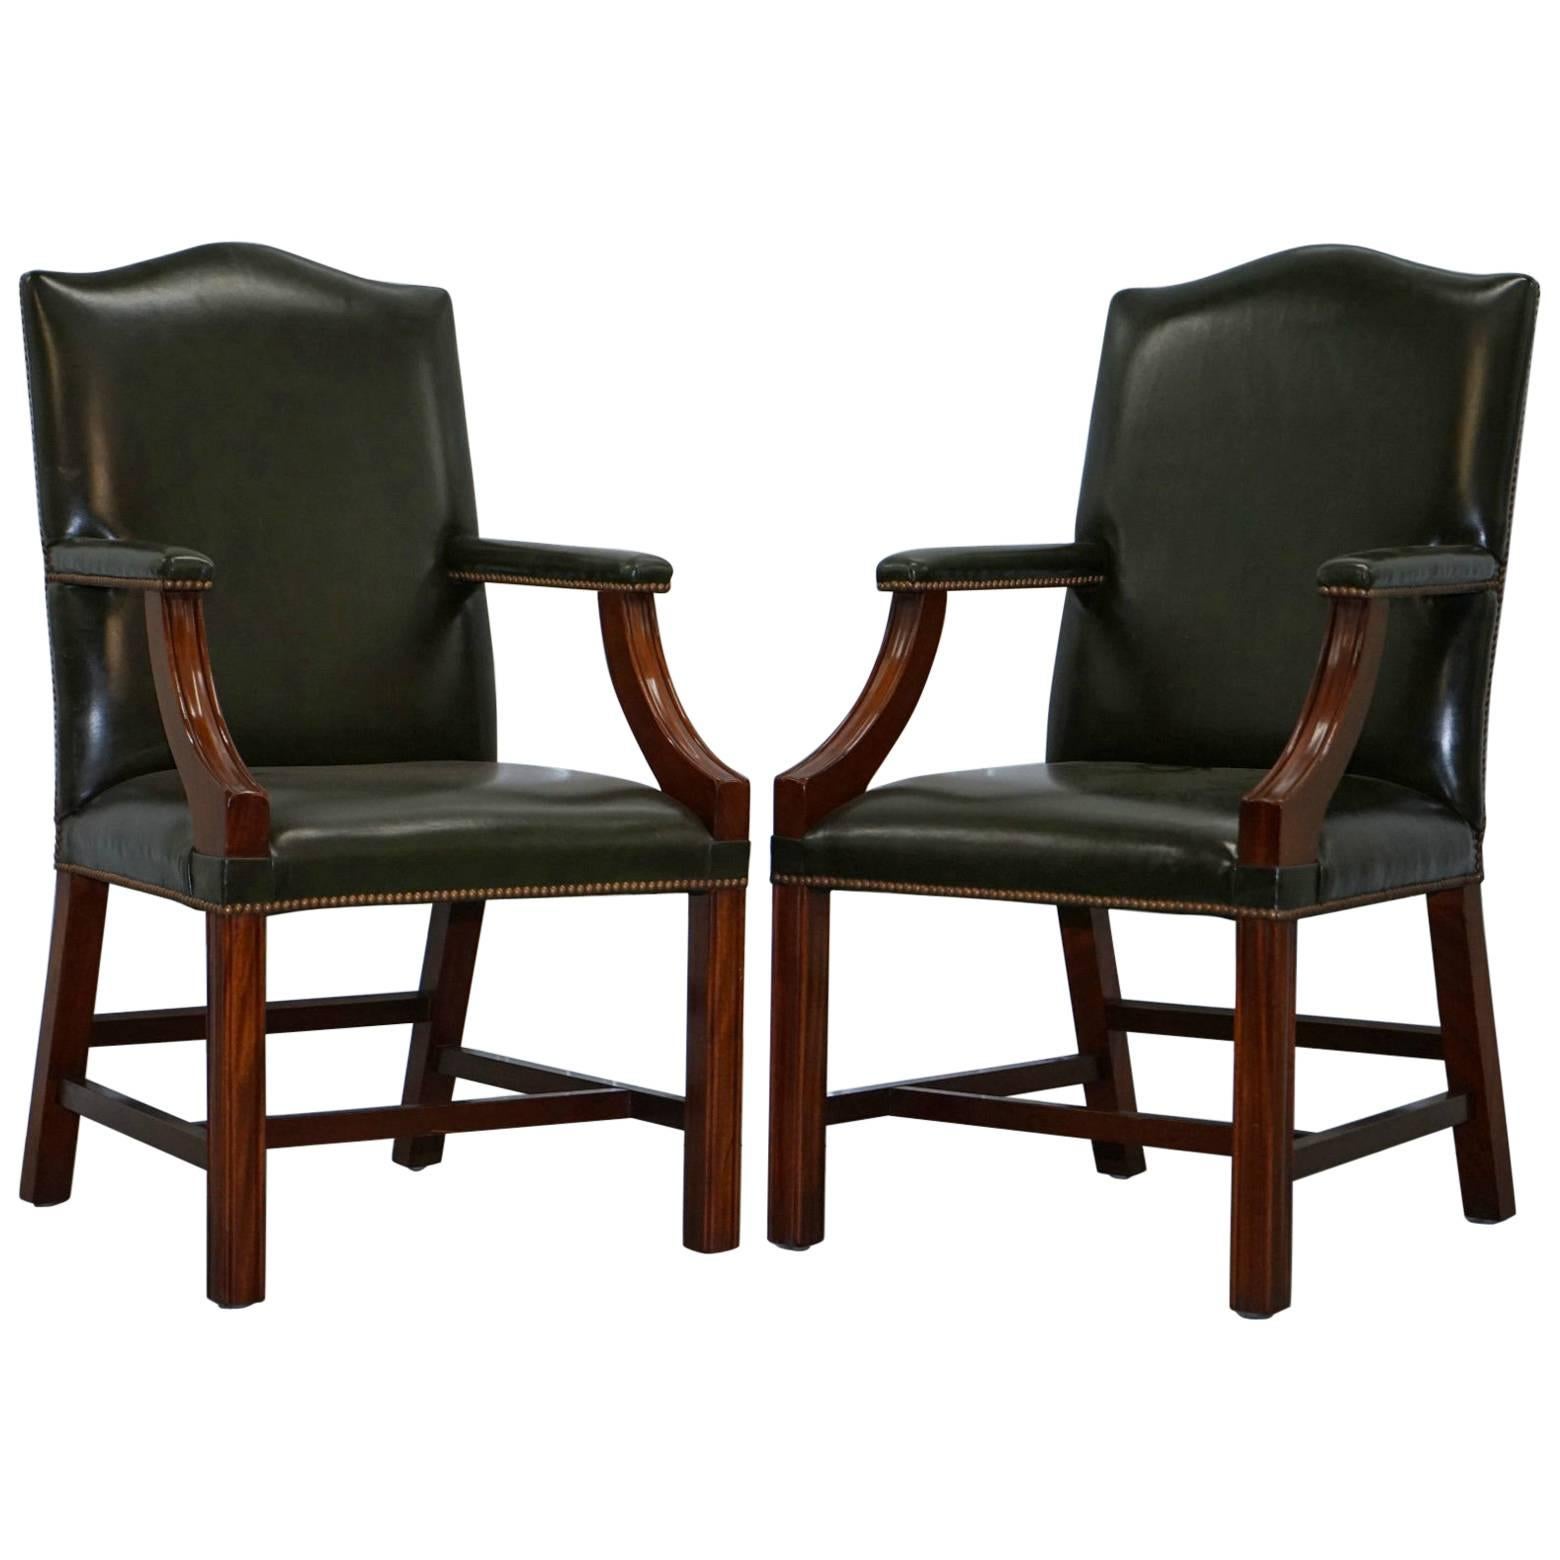 Pair of Frank Hudson & Son Ltd Chesterfield Aged Green Leather Carver Armchairs